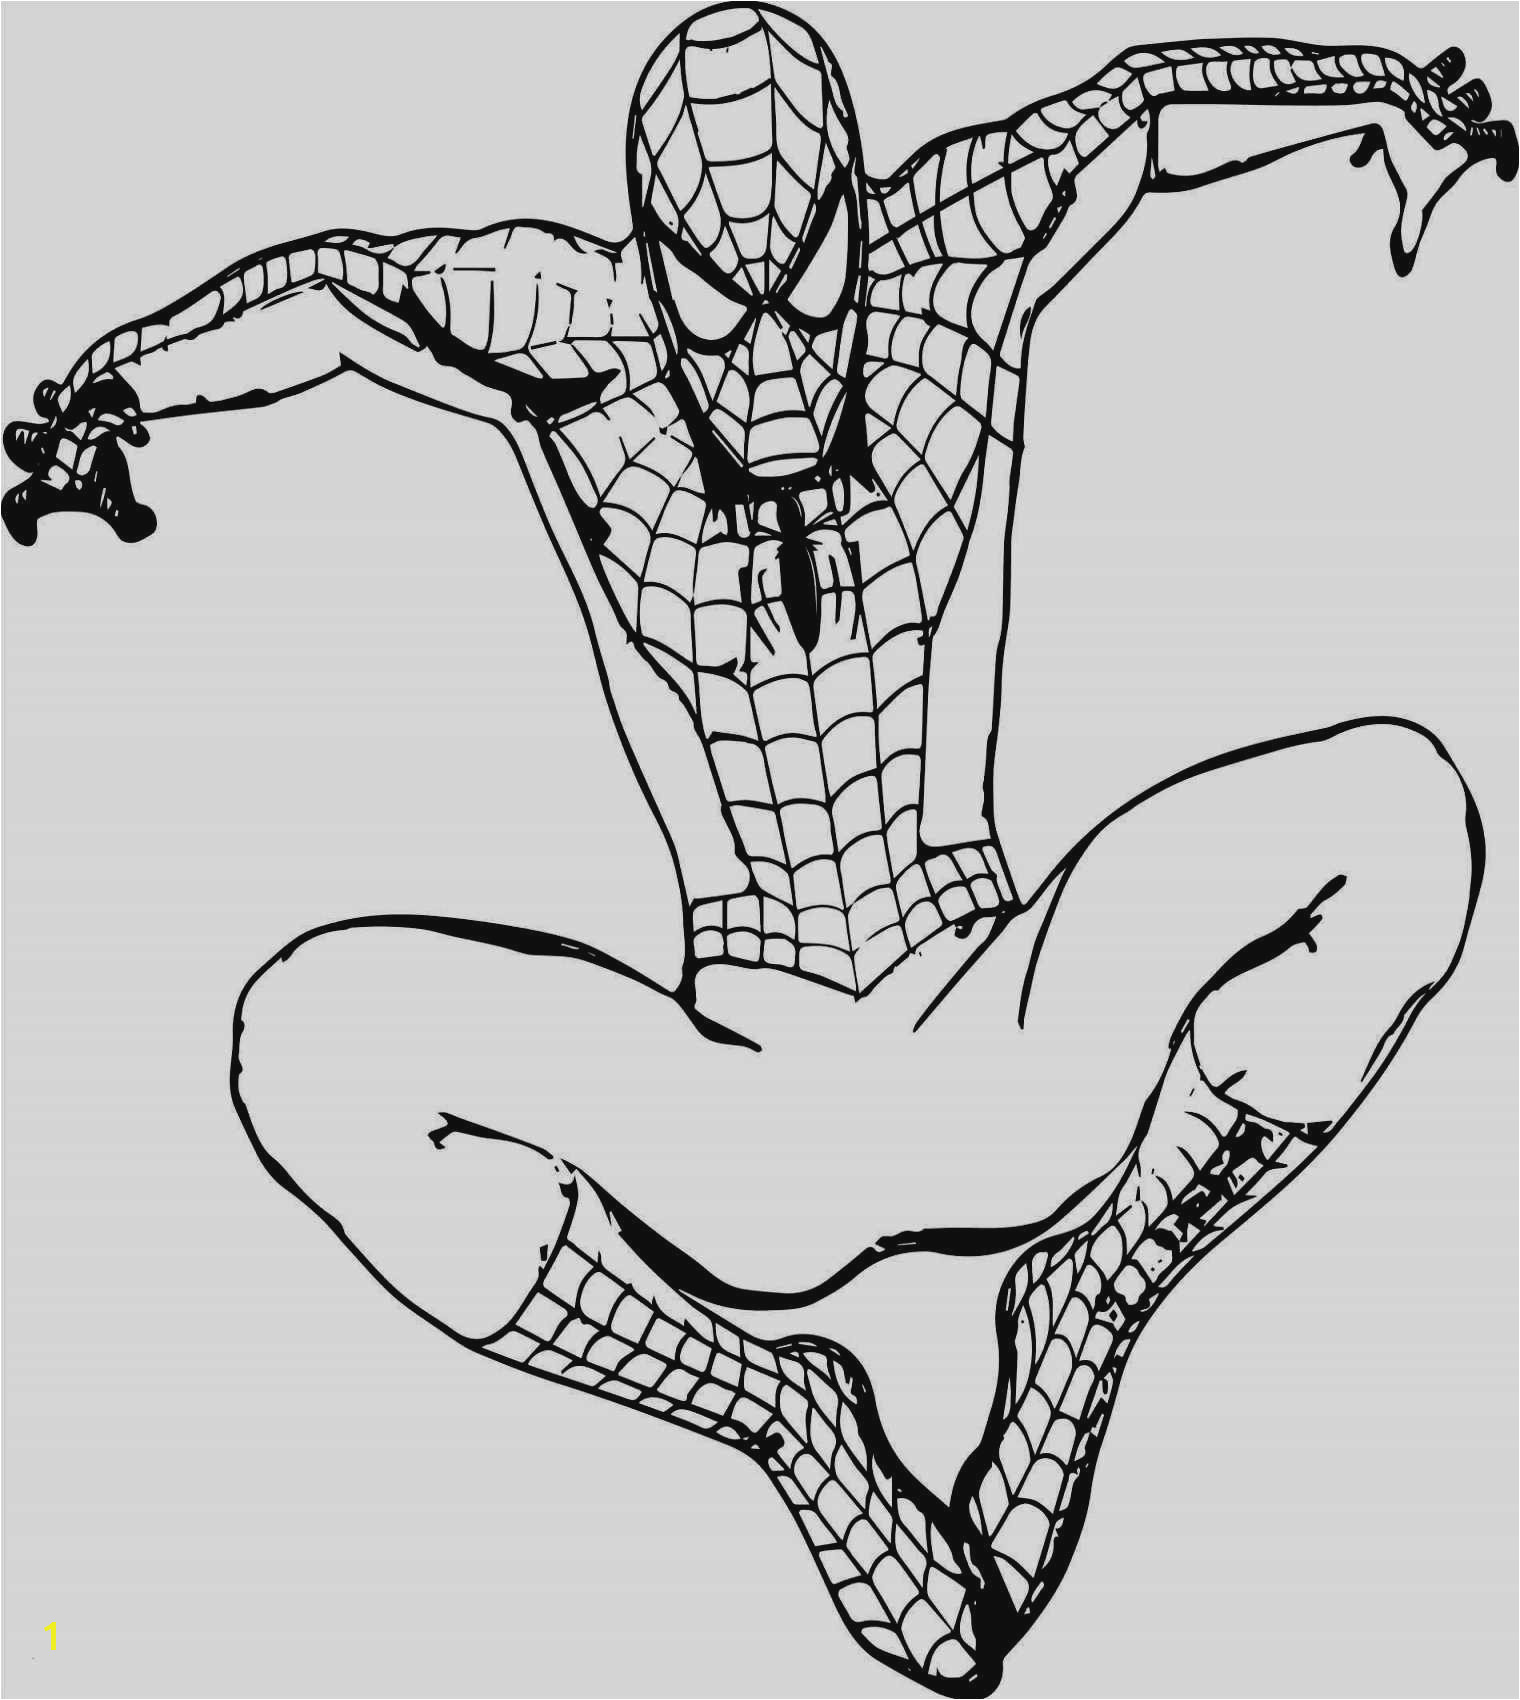 Spider Man and Sandman Coloring Pages Spiderman Coloring Lovable Free Printable Pages Unique 0 0d